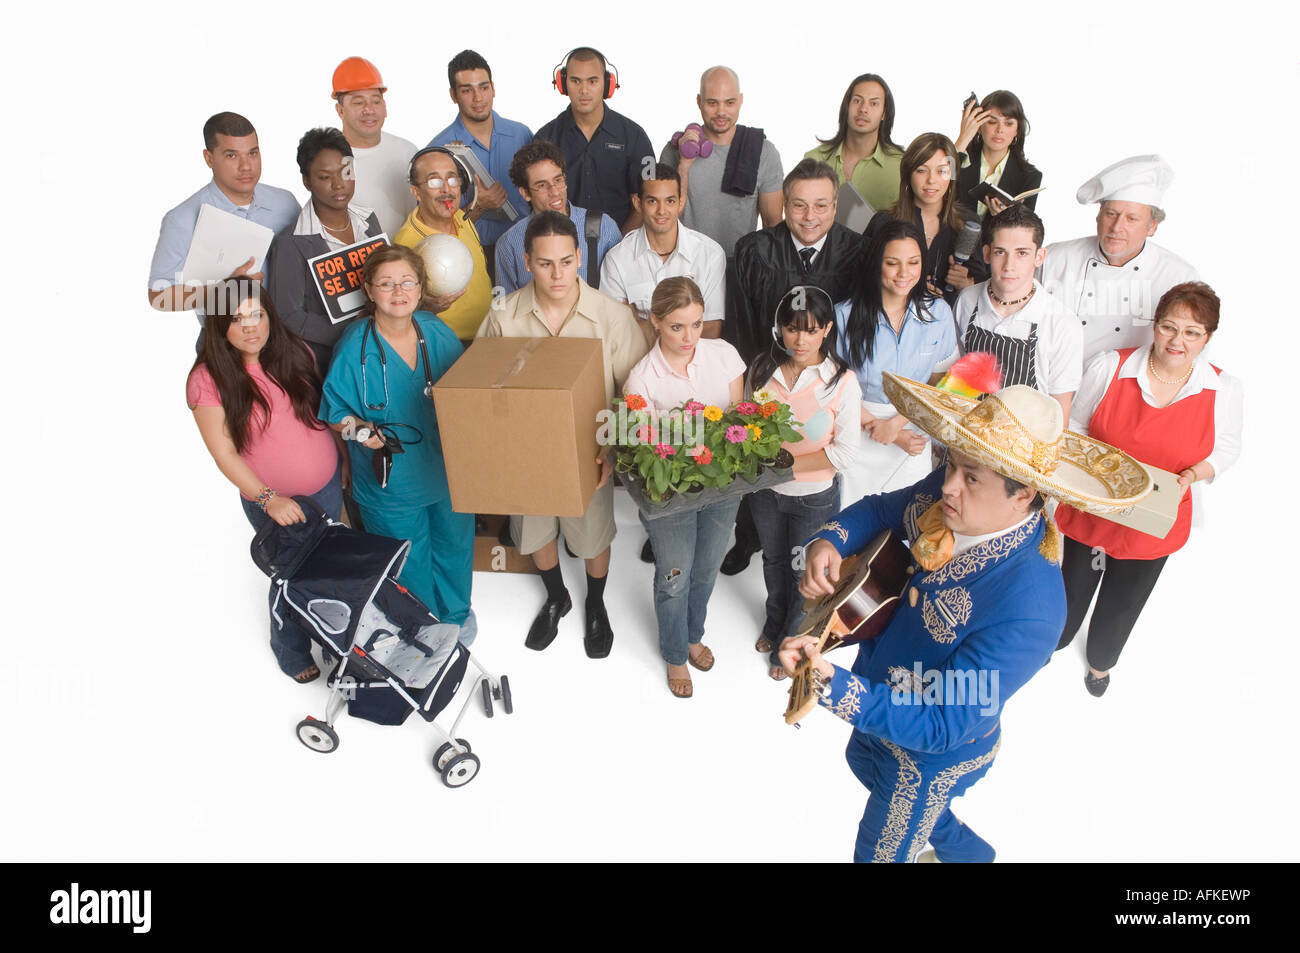 Group portrait of people with different occupations Stock Photo